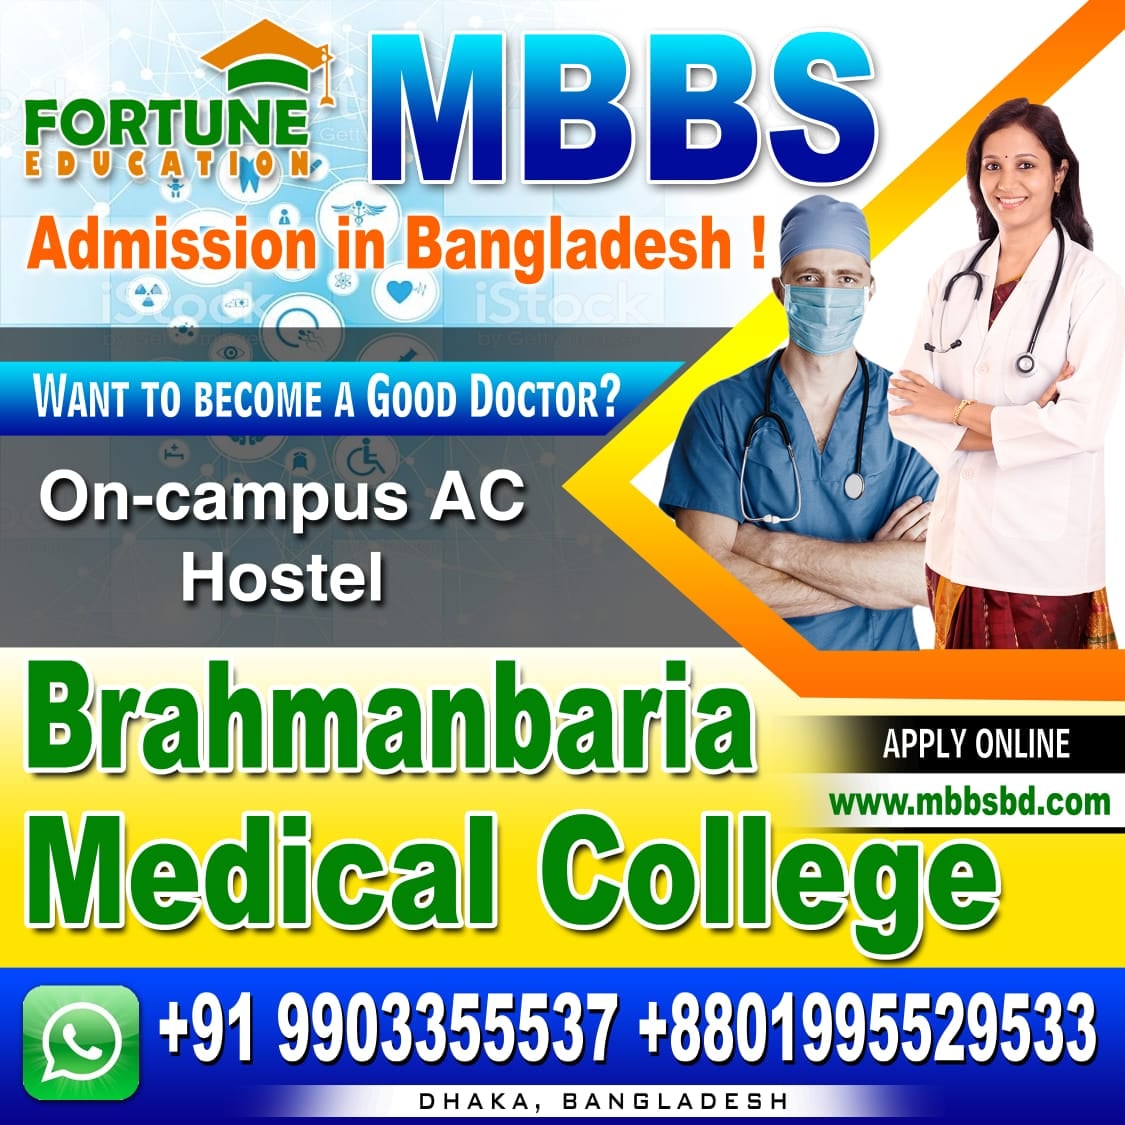 Dhaka National Medical College-Fortune Education